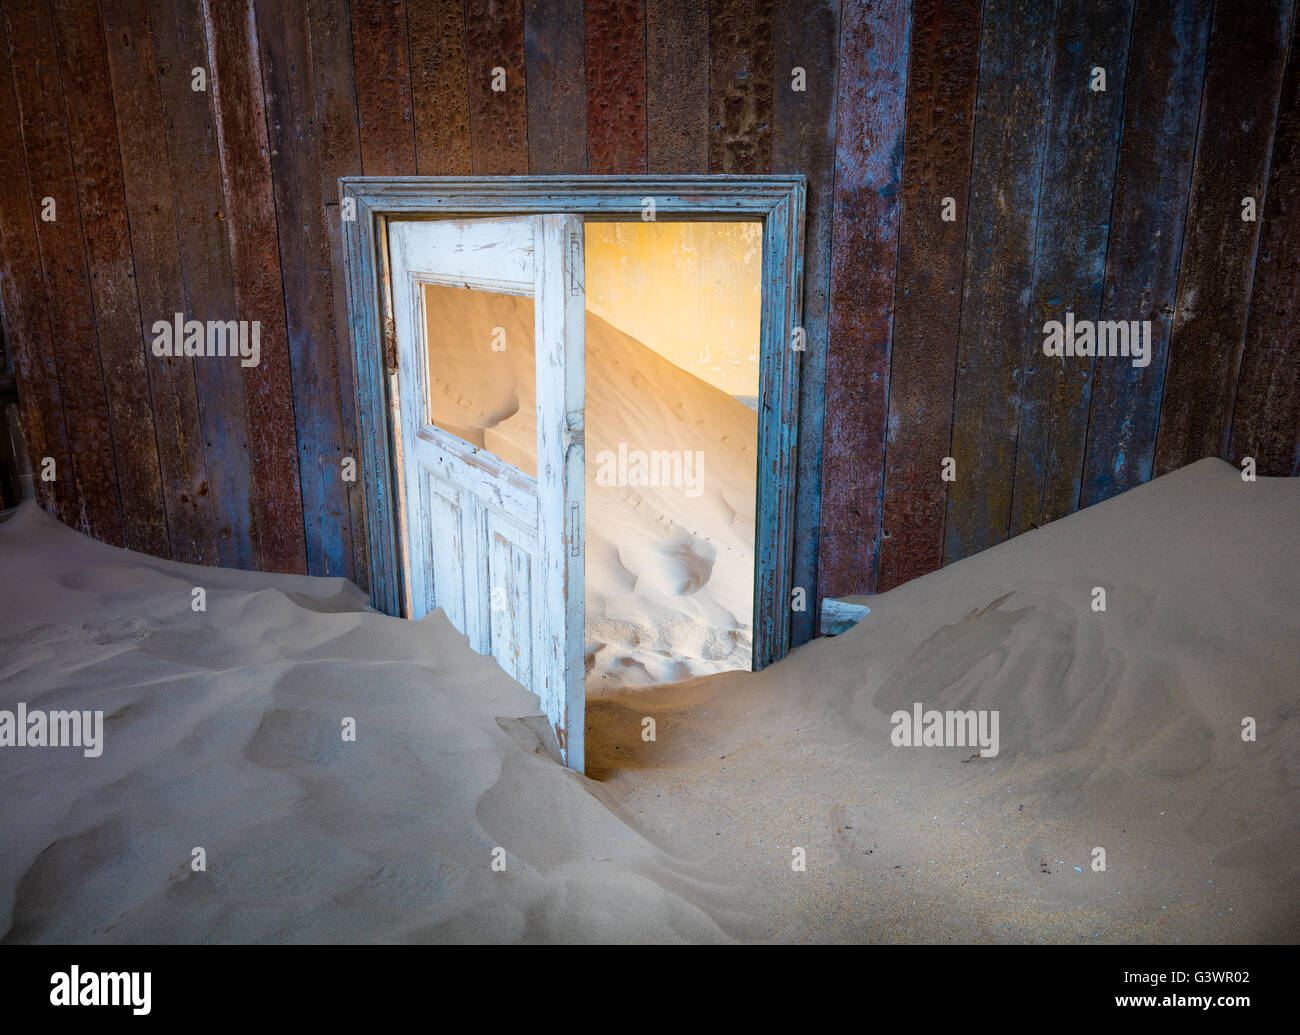 Kolmanskop (Afrikaans for Coleman's hill, German: Kolmannskuppe) is a ghost town in the Namib desert in southern Namibia,. Stock Photo